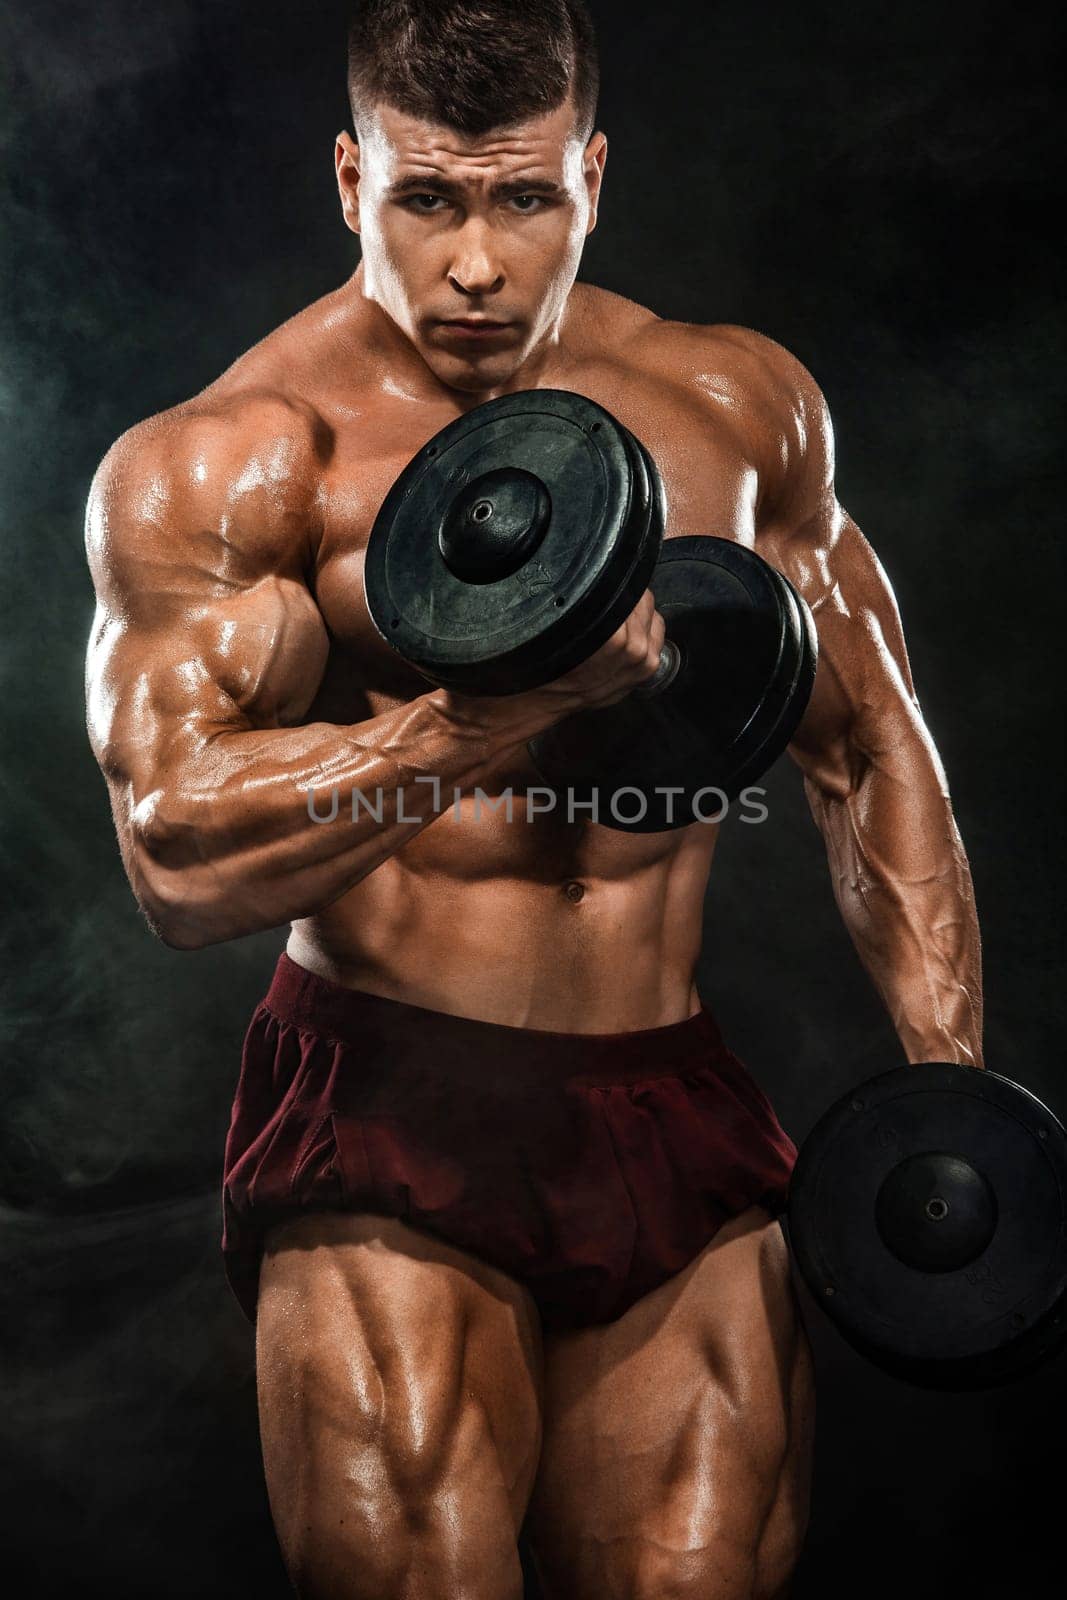 Brutal strong muscular bodybuilder athletic man pumping up muscles with dumbbell on black background. Workout bodybuilding concept. Copy space for sport nutrition ads. by MikeOrlov